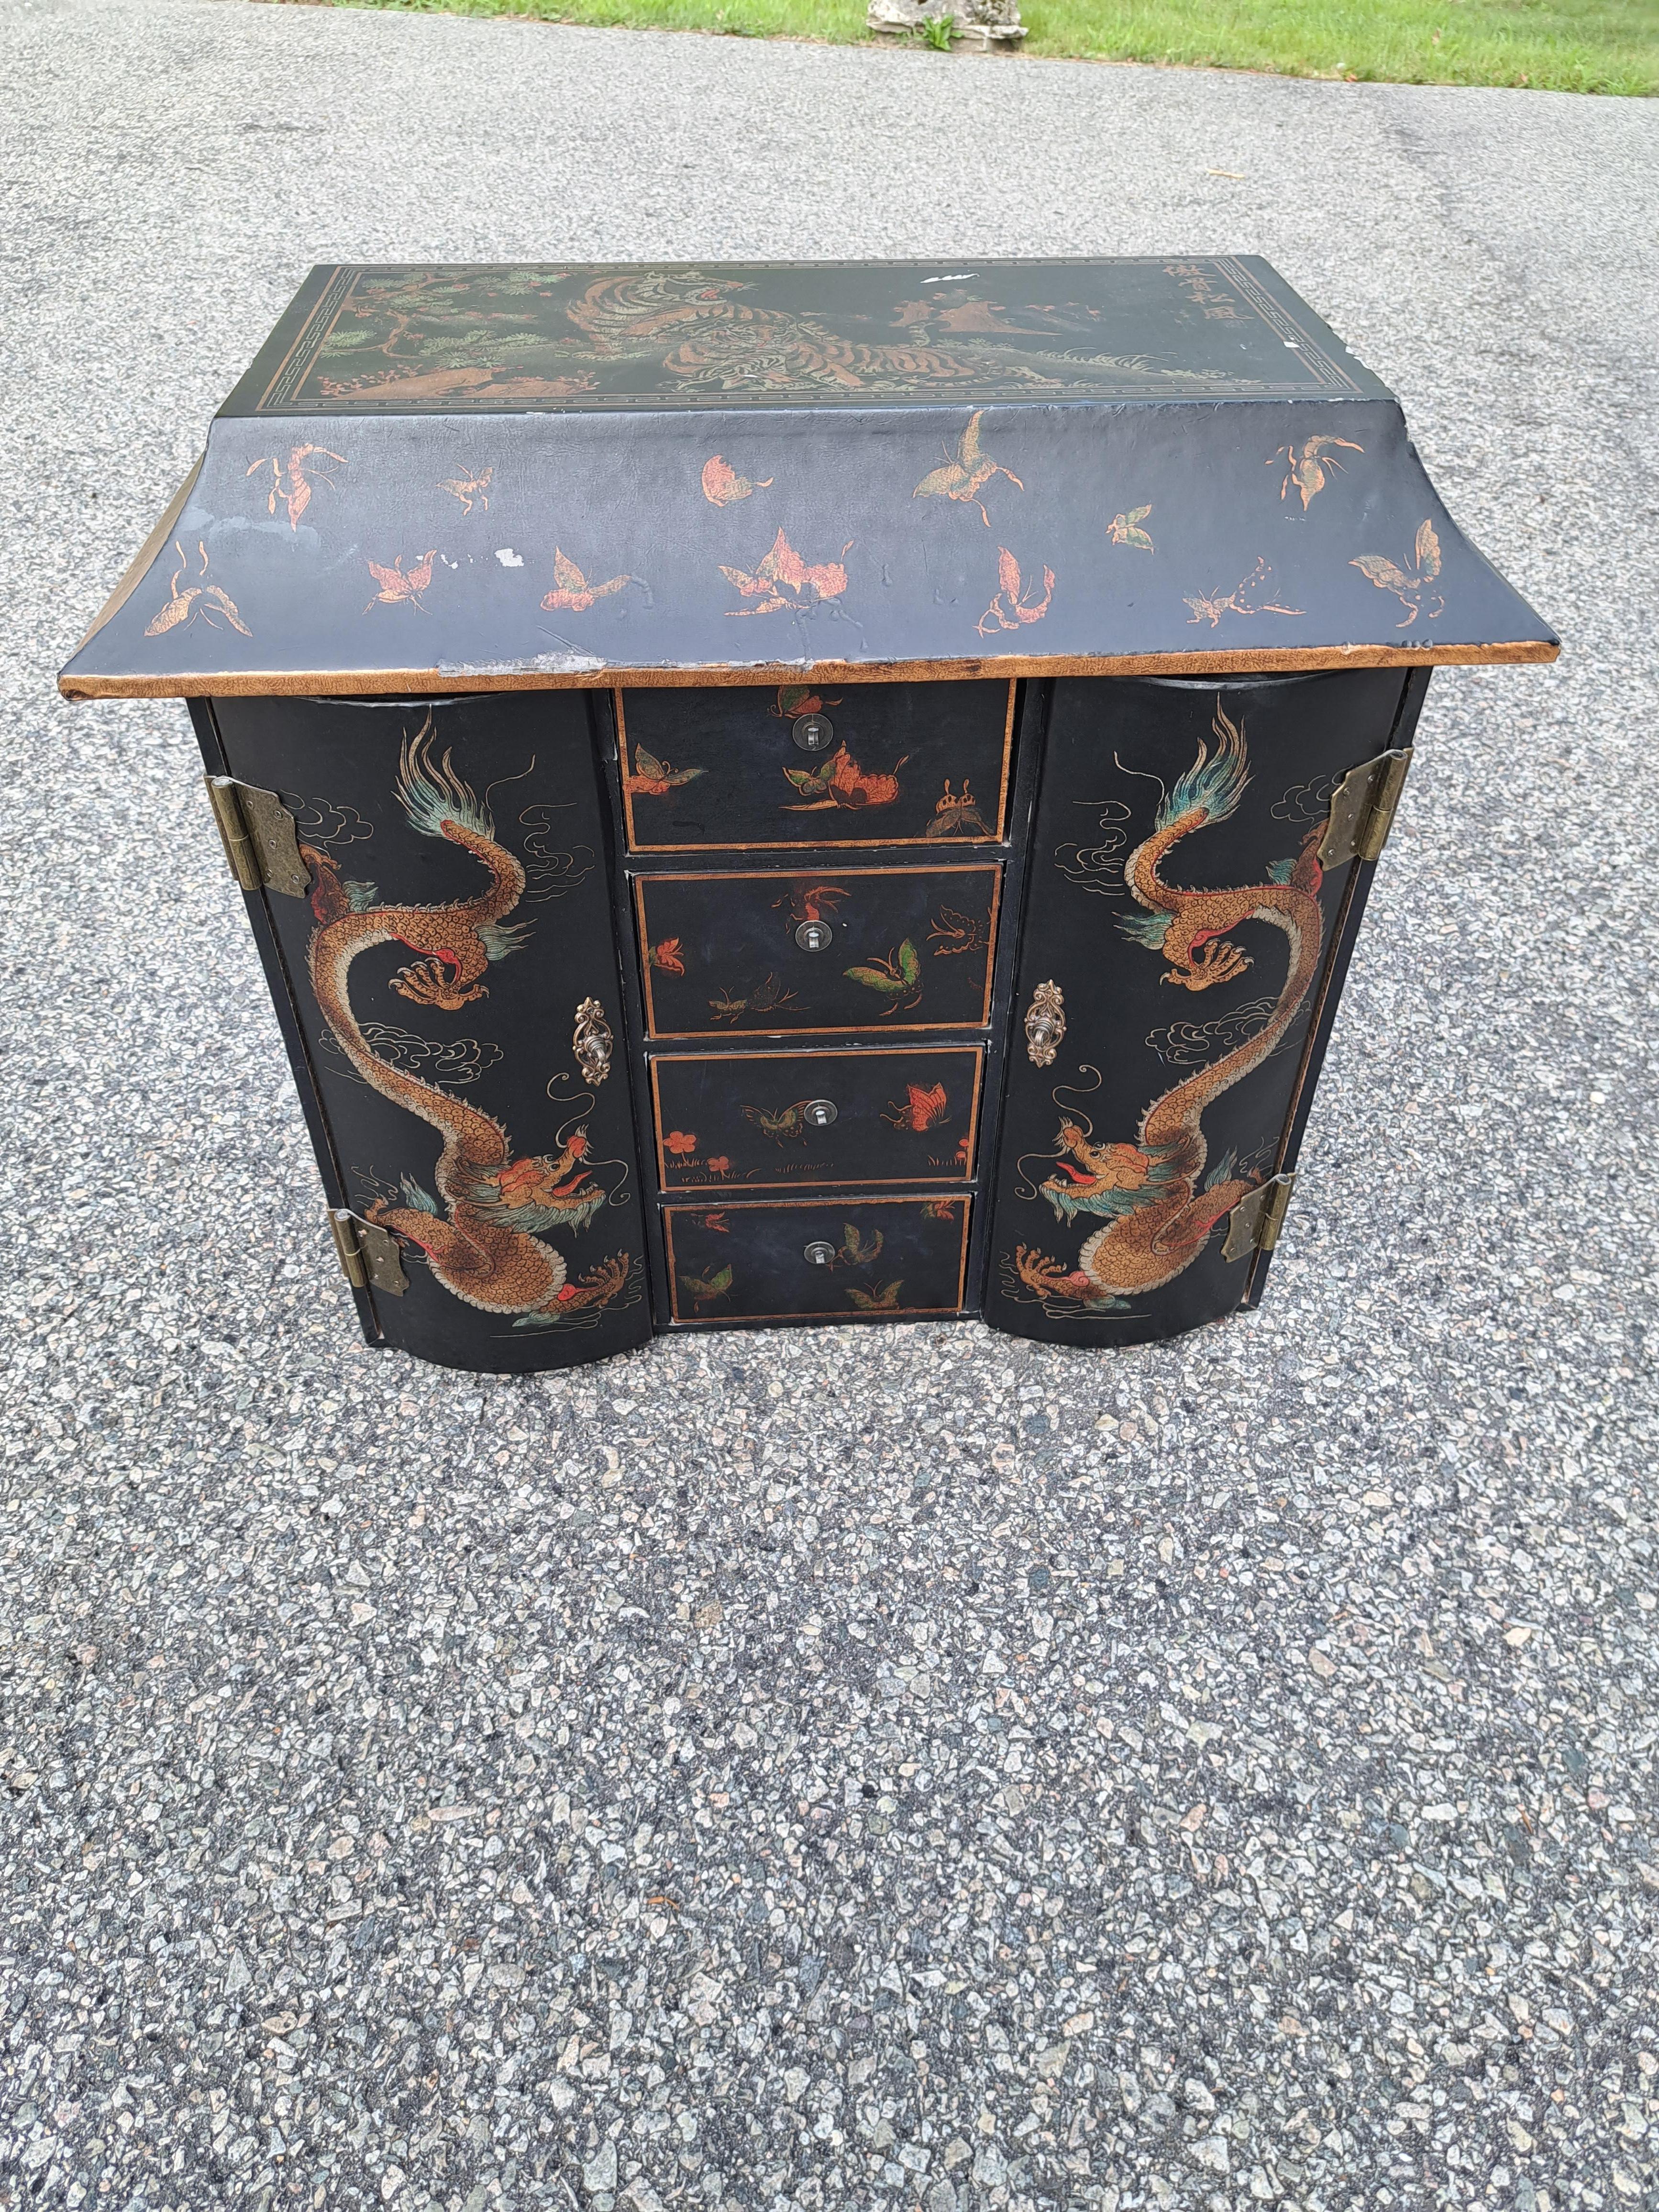 Chinese Antique Asian Chinoiserie  Pagoda Shaped Tea / Apothecary Cabinet  For Sale